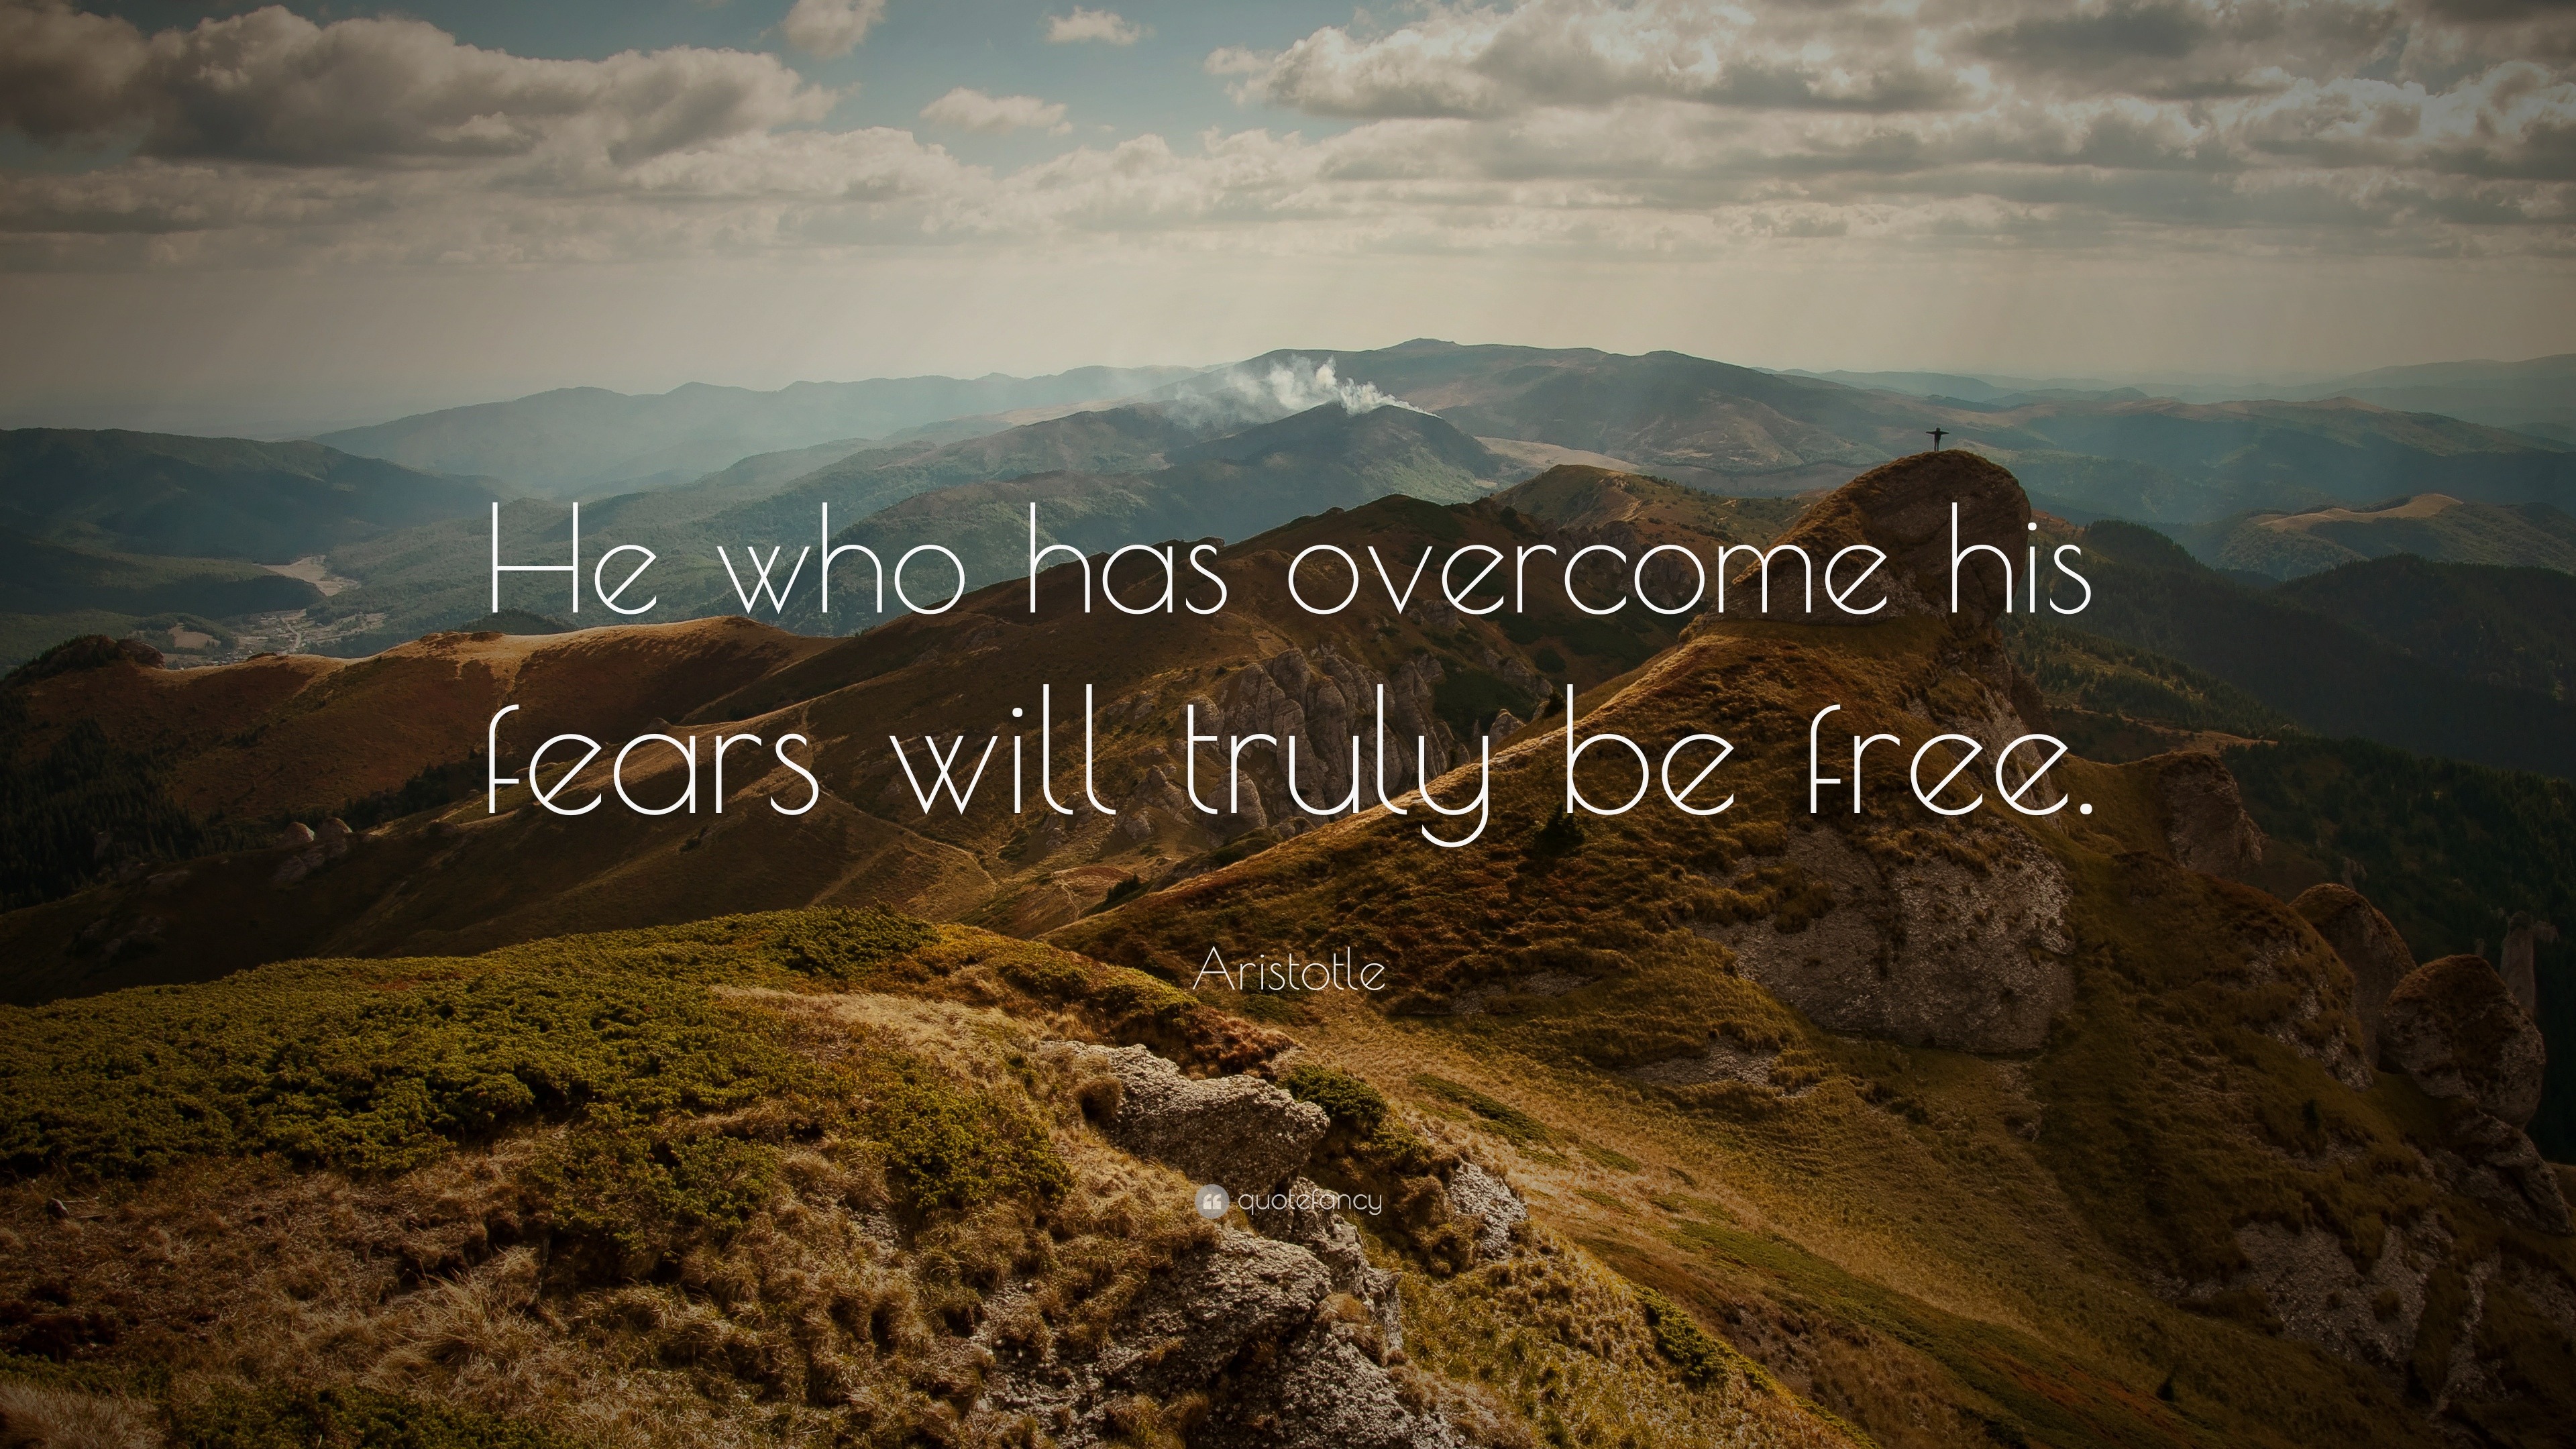 Aristotle Quote: “He who has overcome his fears will truly be free.”